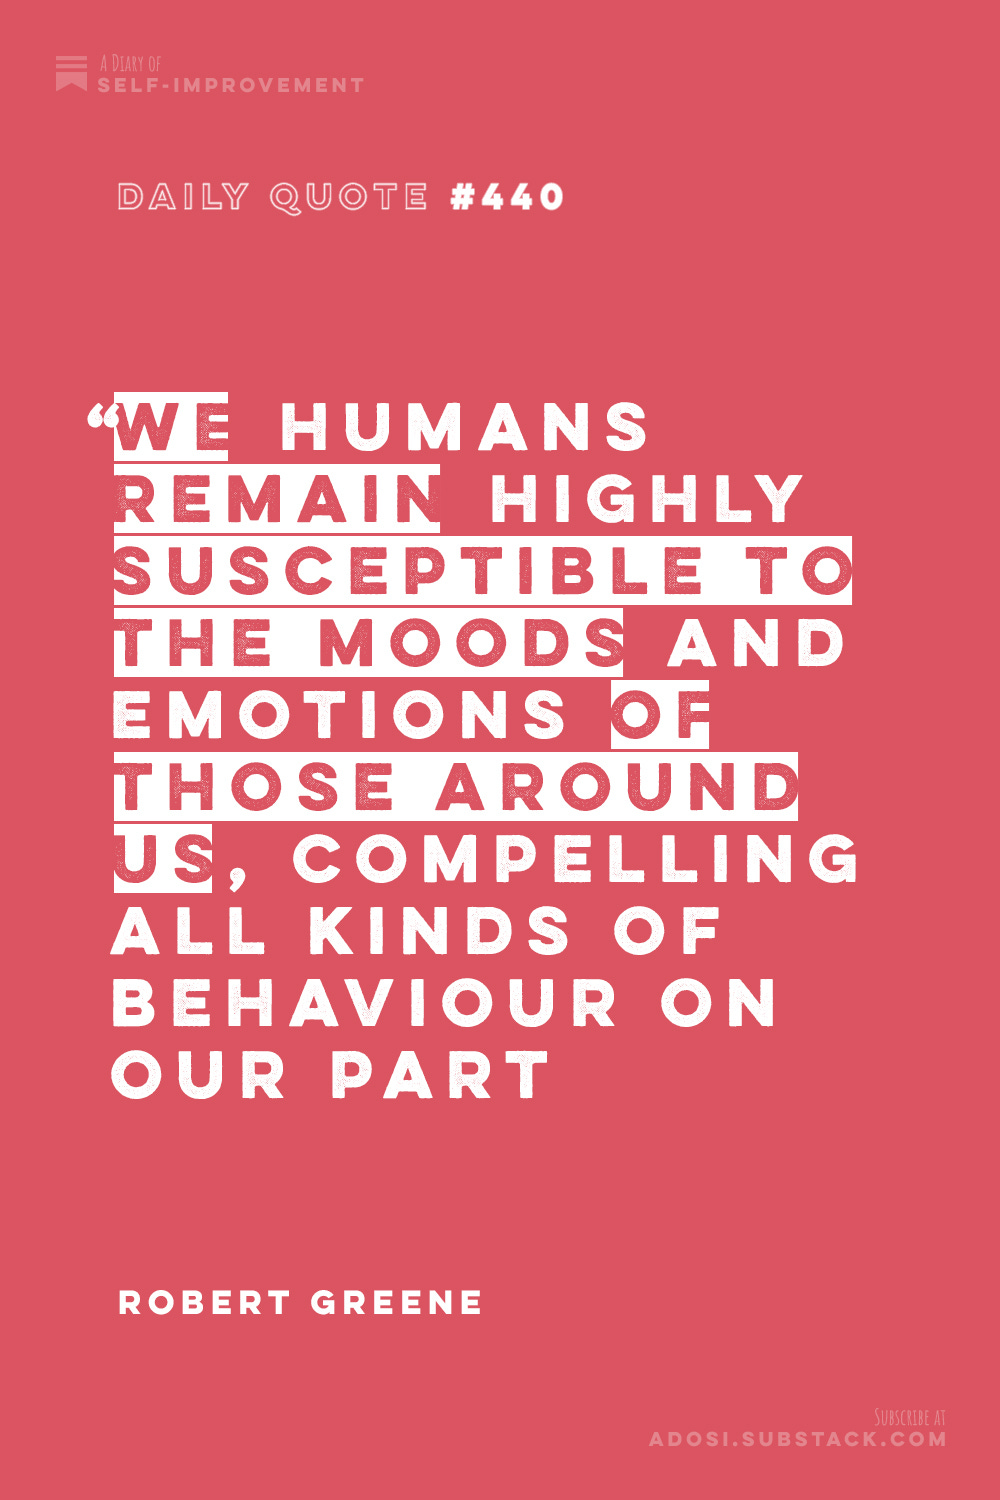 Daily Quote #440: "We humans remain highly susceptible to the moods and emotions of those around us, compelling all kinds of behaviour on our part." Robert Greene